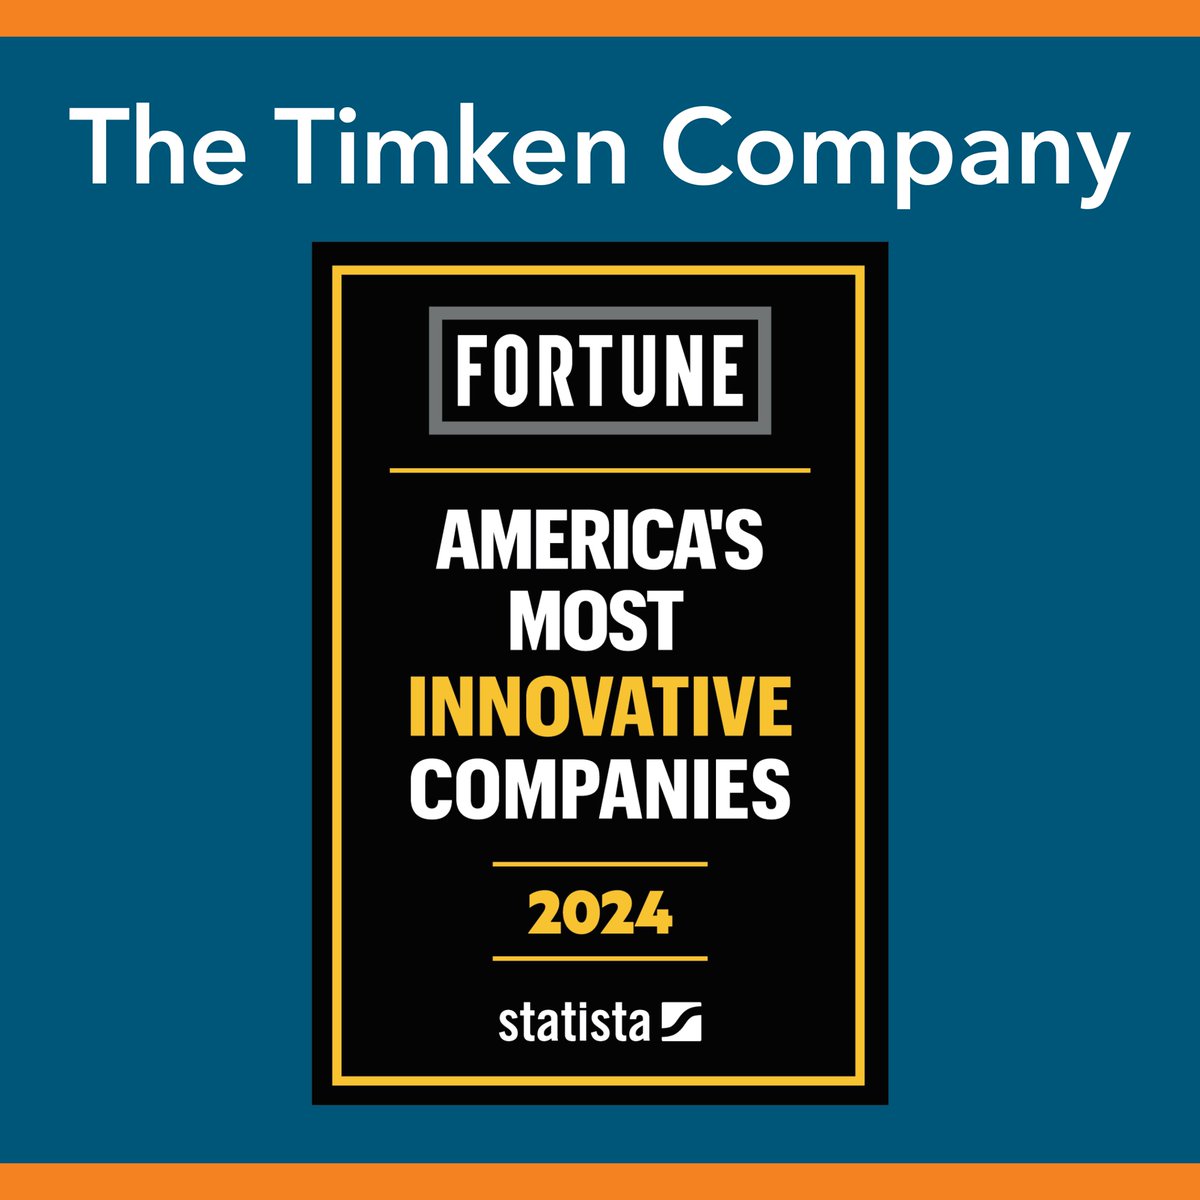 Timken was named one of America’s Most Innovative Companies by @FortuneMagazine for the second straight year. We’re honored to partner with leading global companies, including many on this prestigious list. tmkn.biz/3xzvNkR #Innovation #Timken $TKR